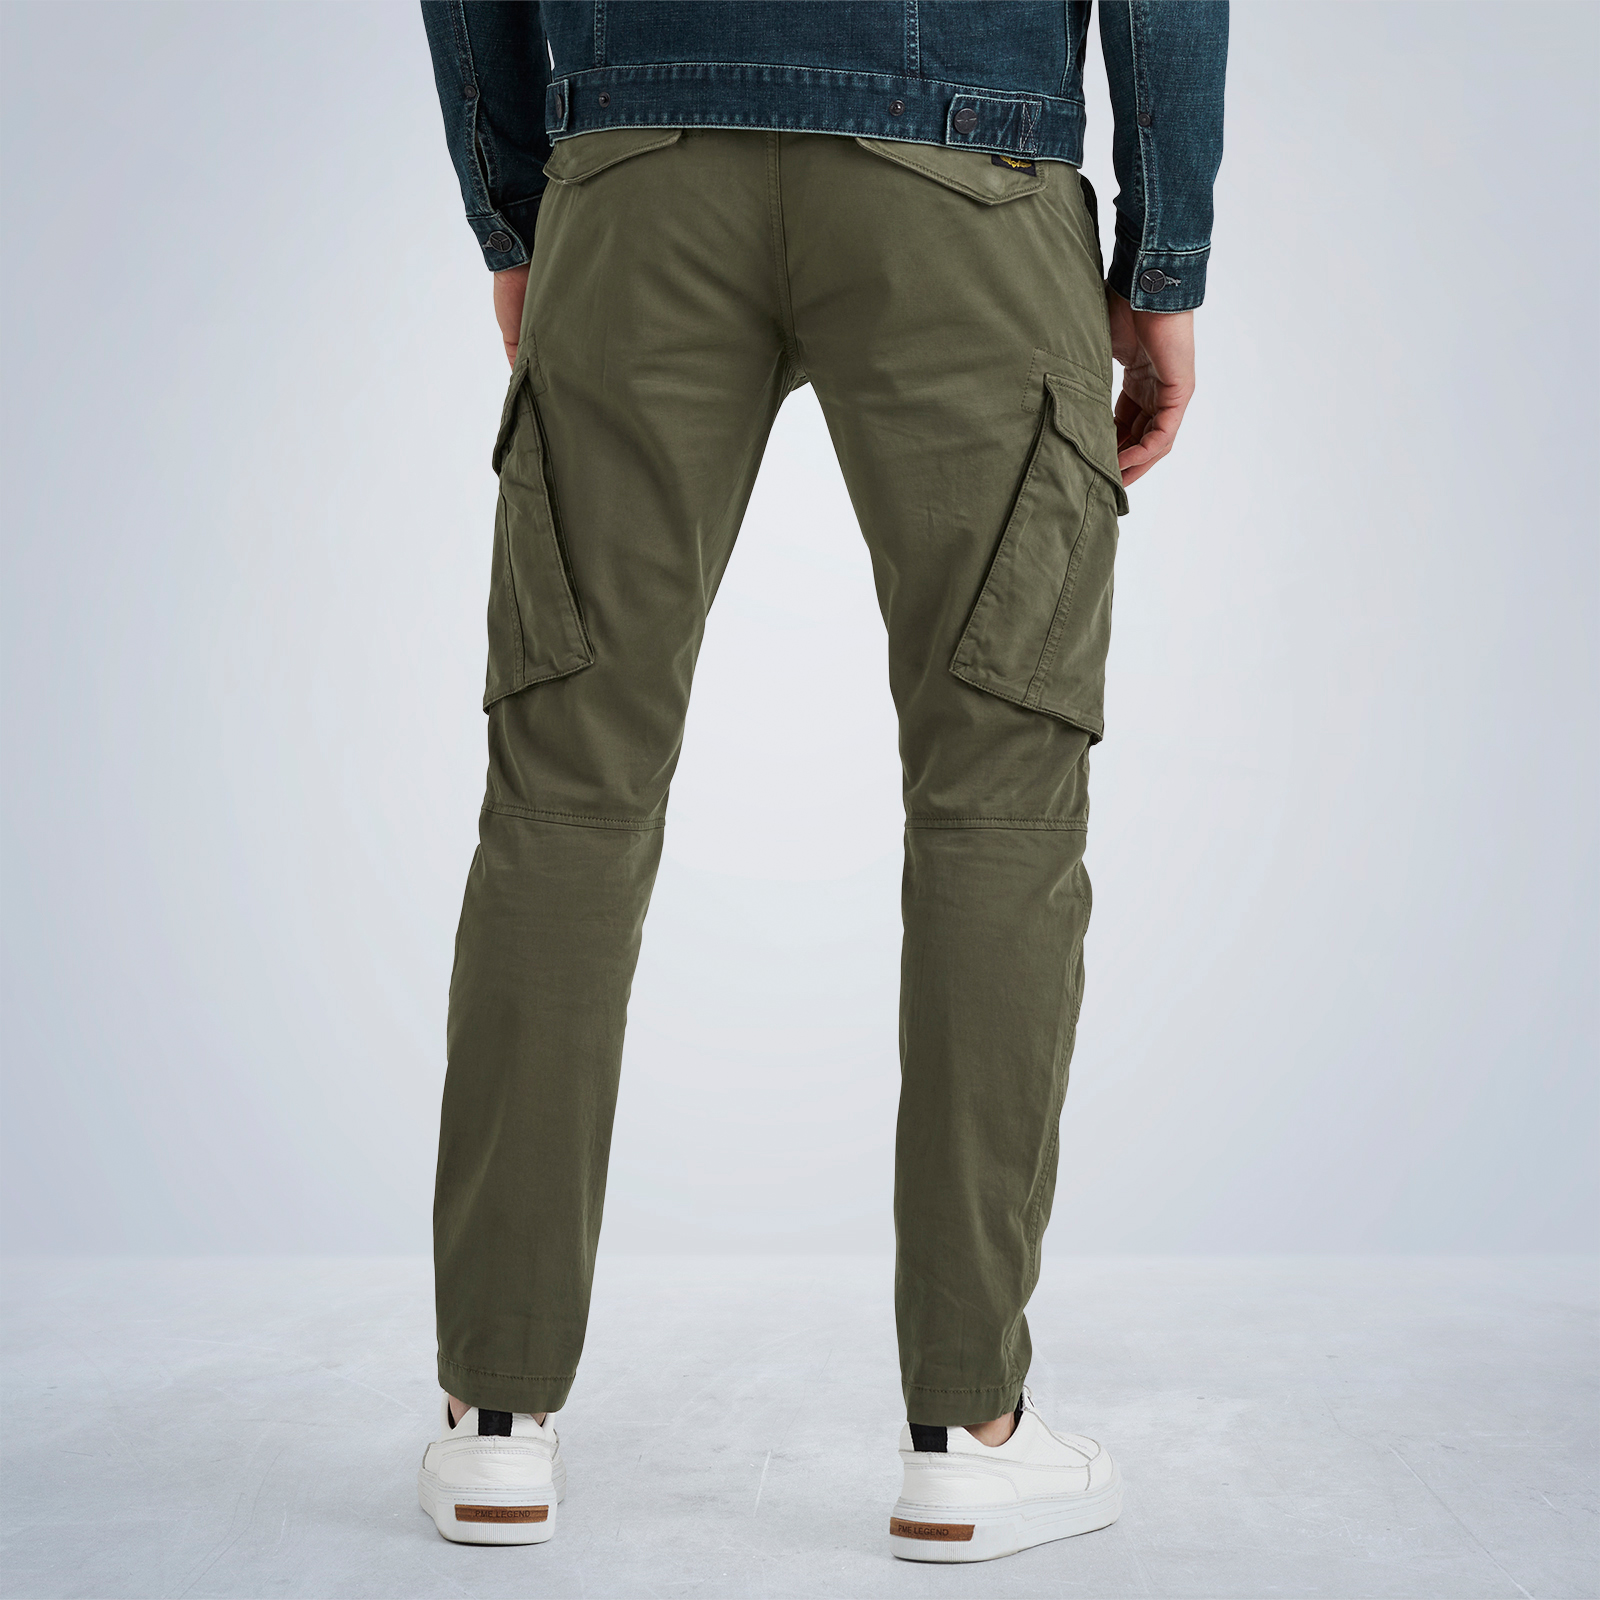 PME fit tapered - shipping Nordrop cargo and | Free pants LEGEND returns